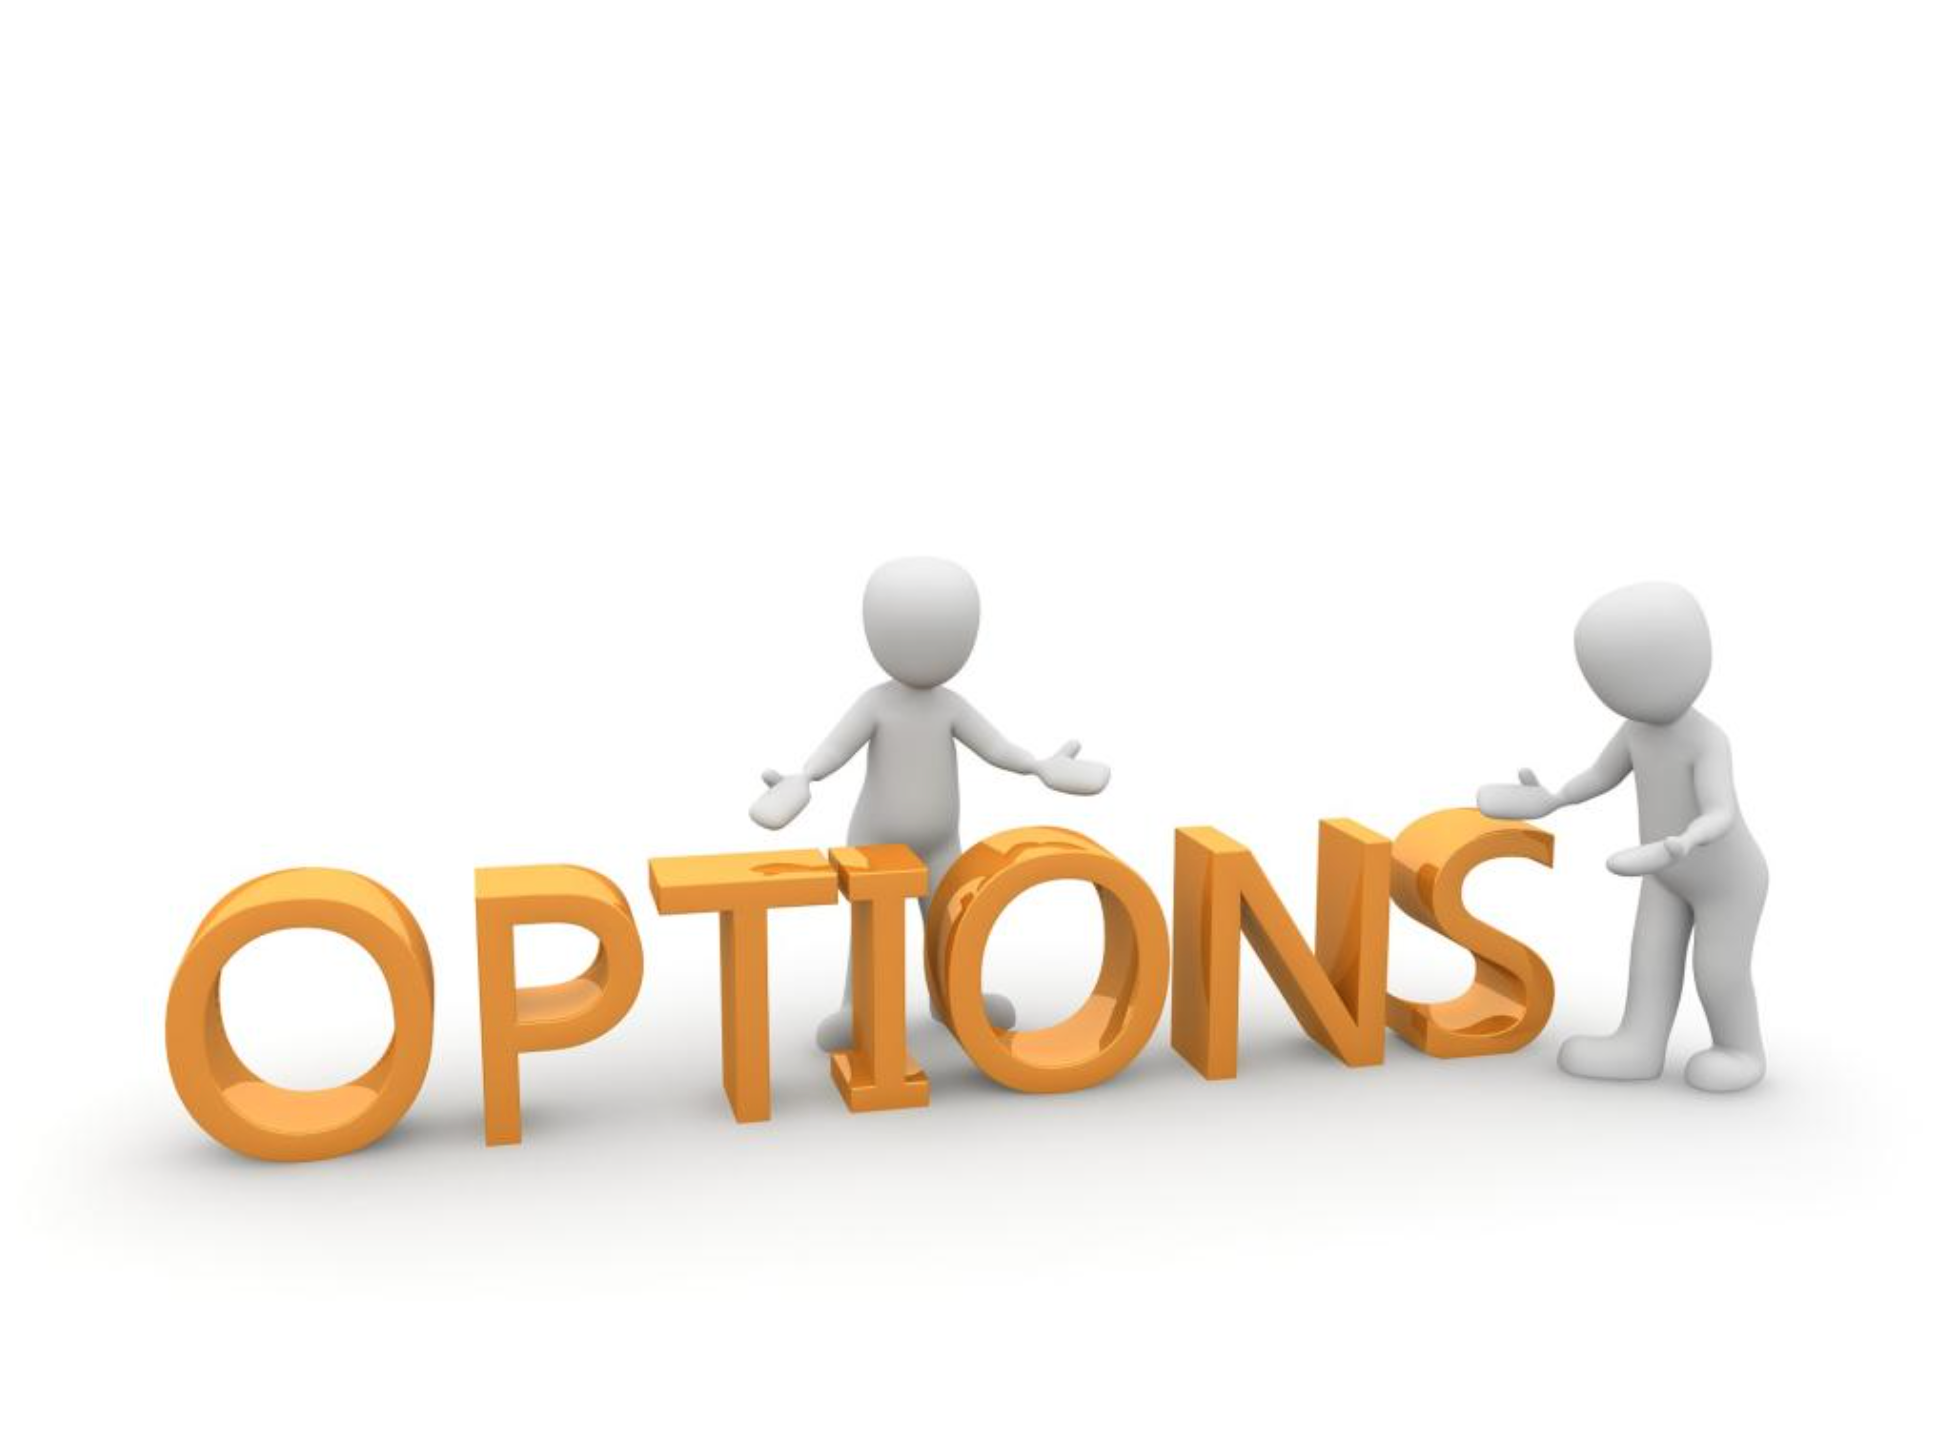 sell options before expiration, sell options on stocks you own, sell call options strategy, sell put options strategy, sell call options for income, sell put options for income, sell put options to buy stocks, sell put options risk